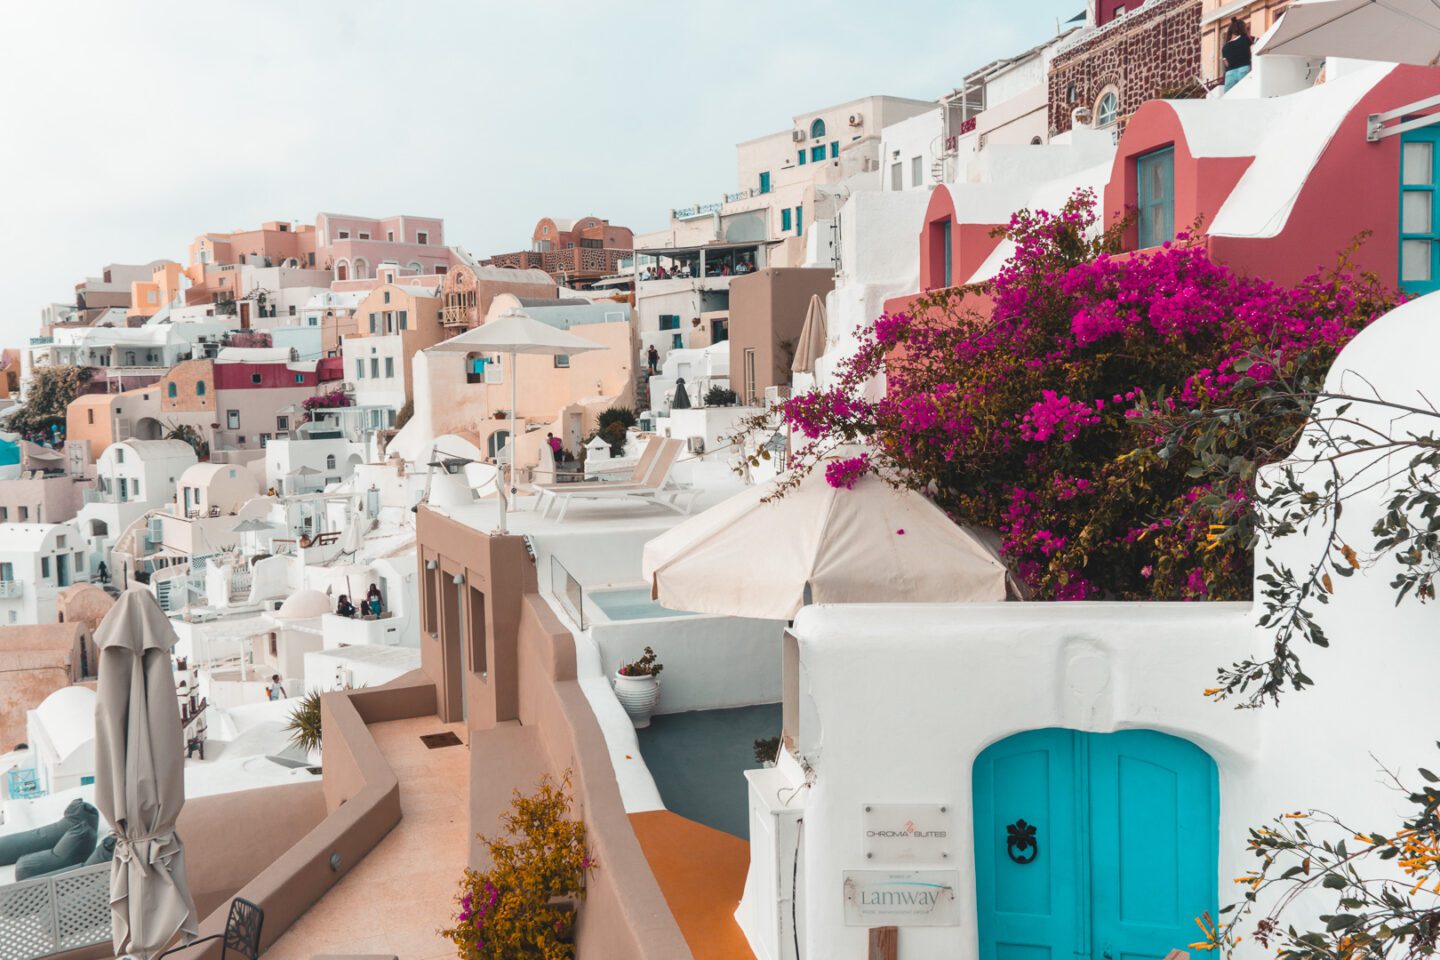 Santorini is a must-see during your 10 Days in Greece Itinerary. Here you will see white washed buildings, blue doors, and flowering bougainvillea.